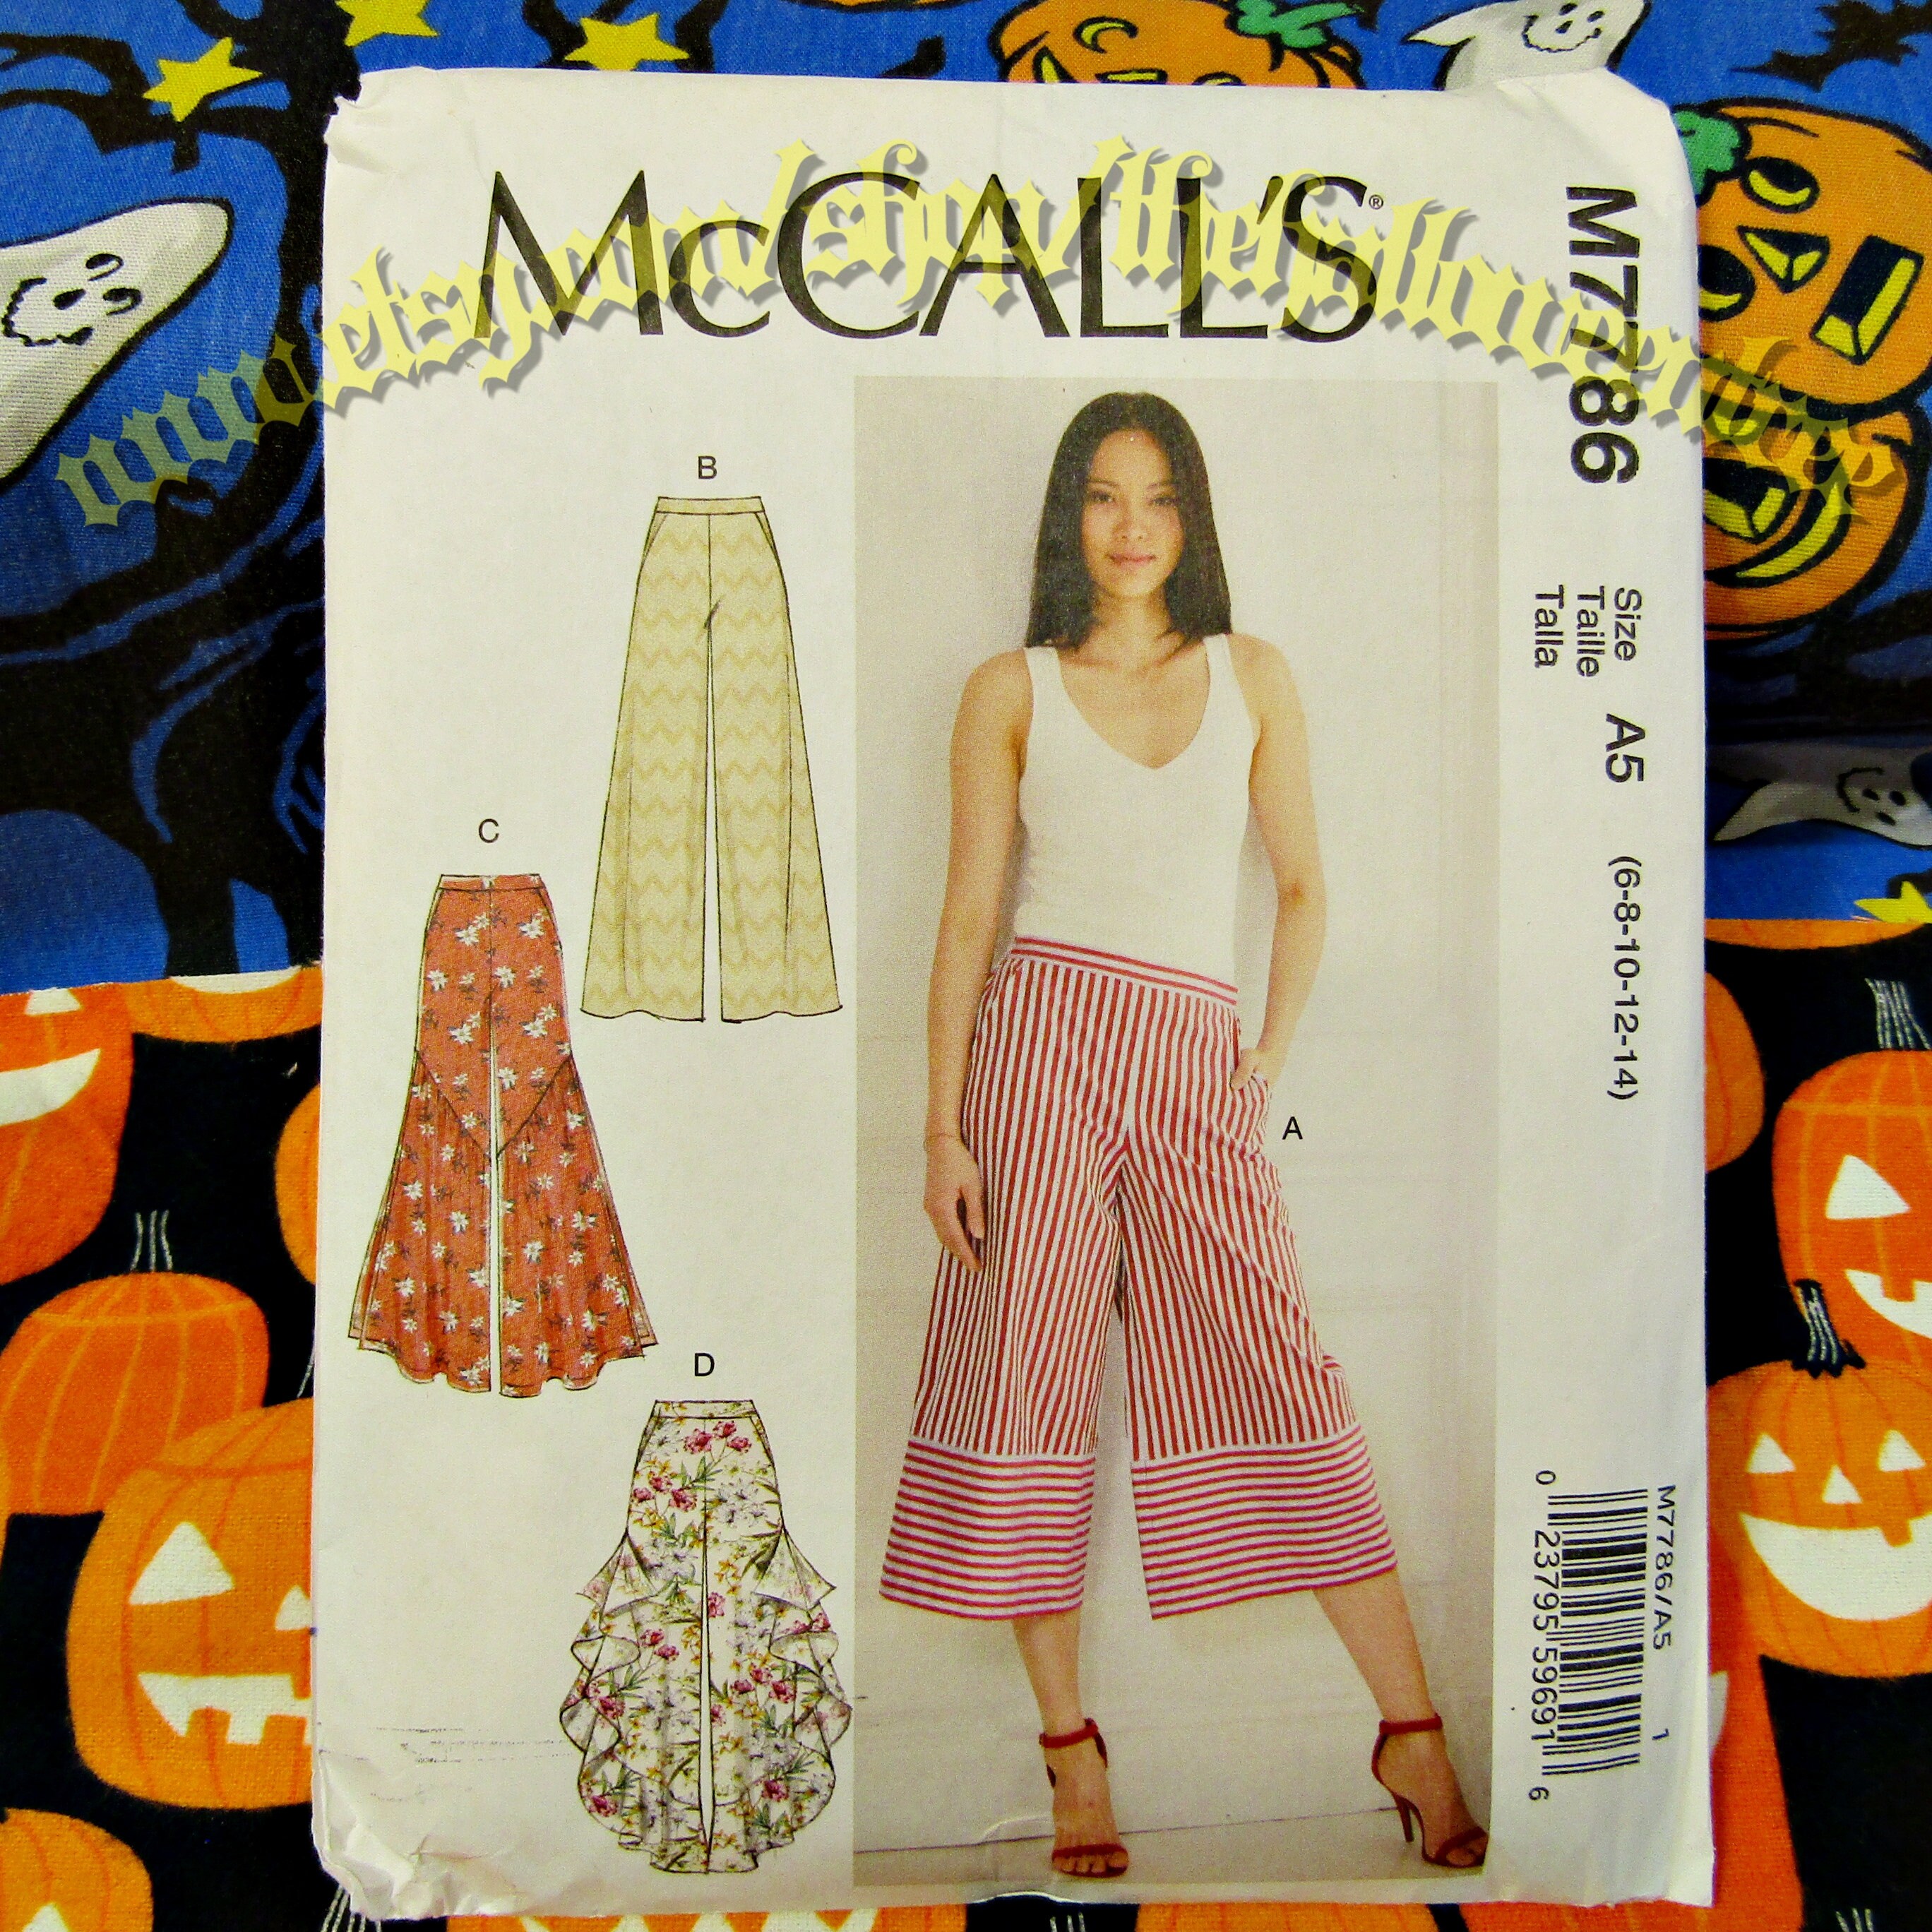 Sewing Pattern for Womens Tops, Mccalls Pattern M7958, New Pattern